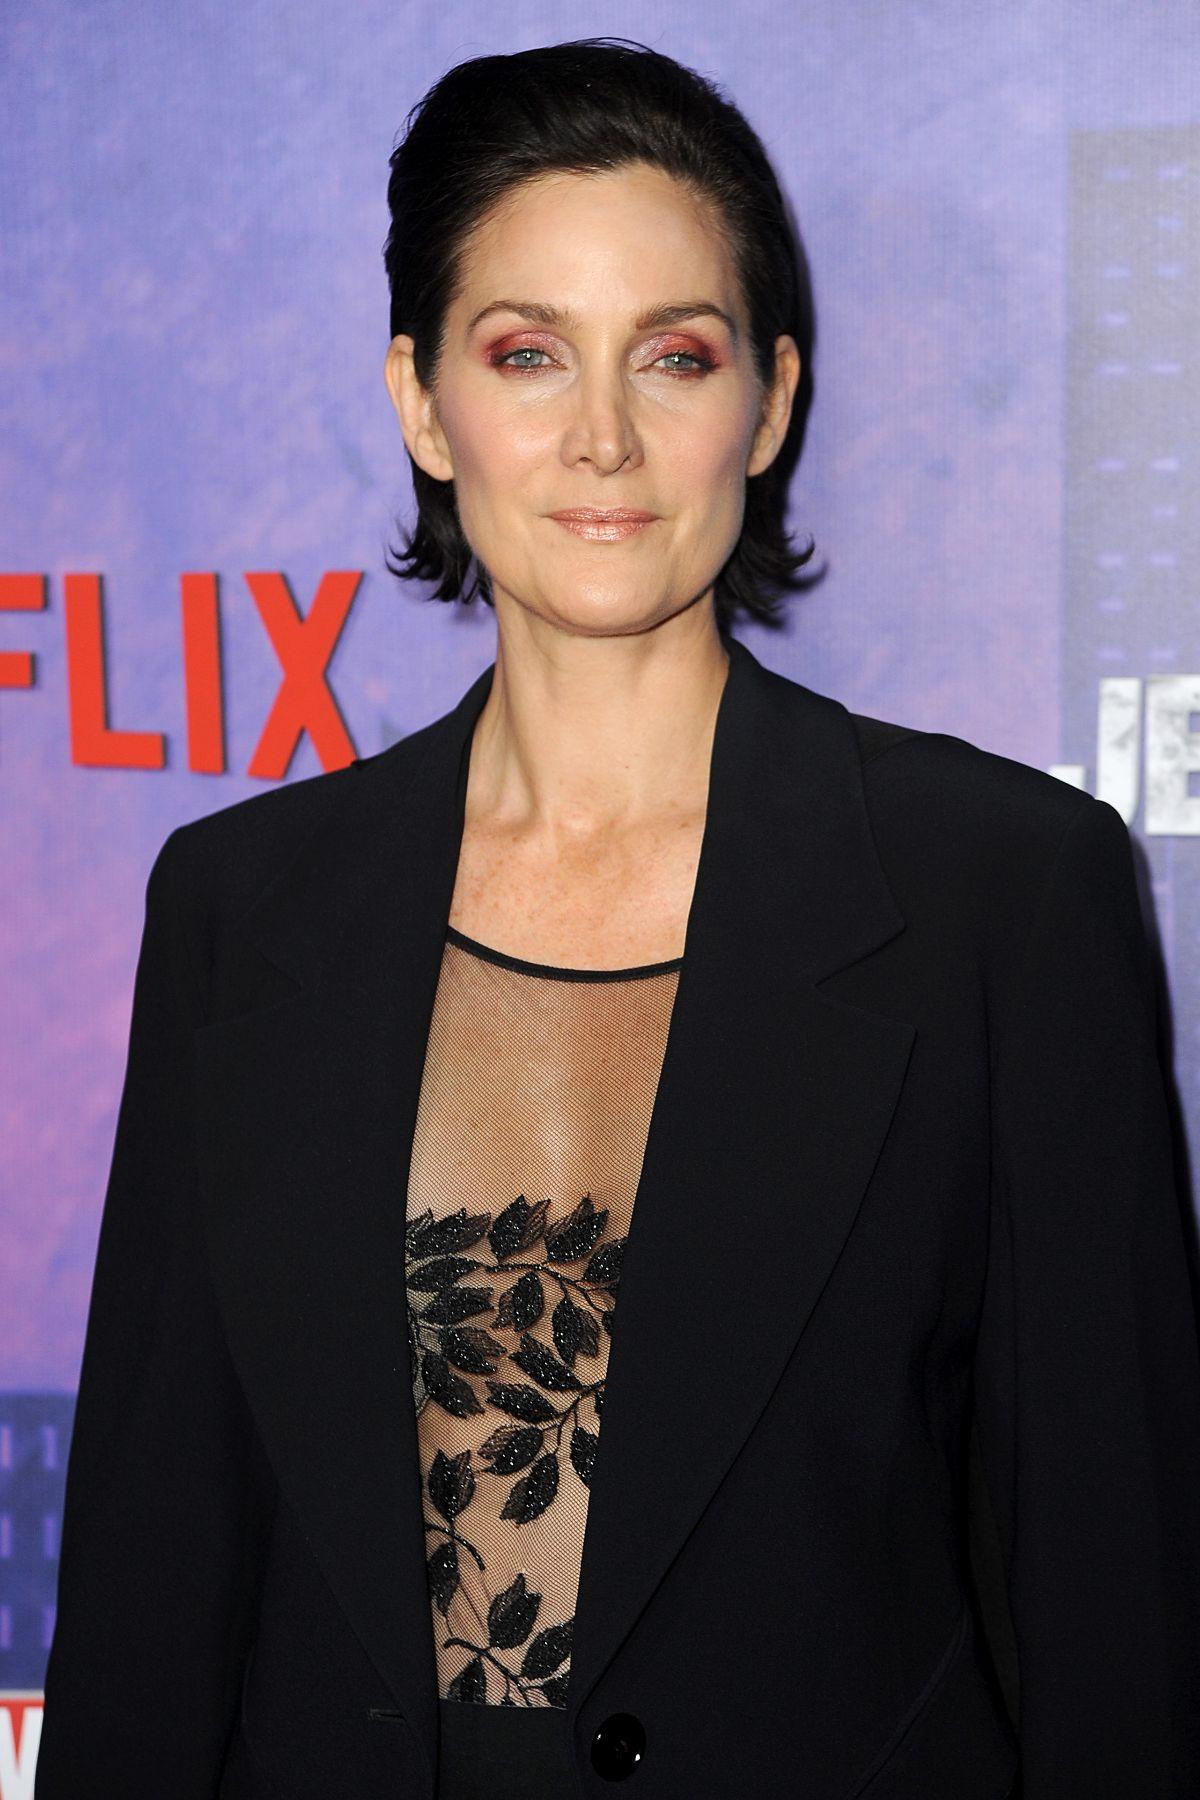 70+ Hot Pictures Of Carrie Anne Moss Will Drive You Nuts For Her 526